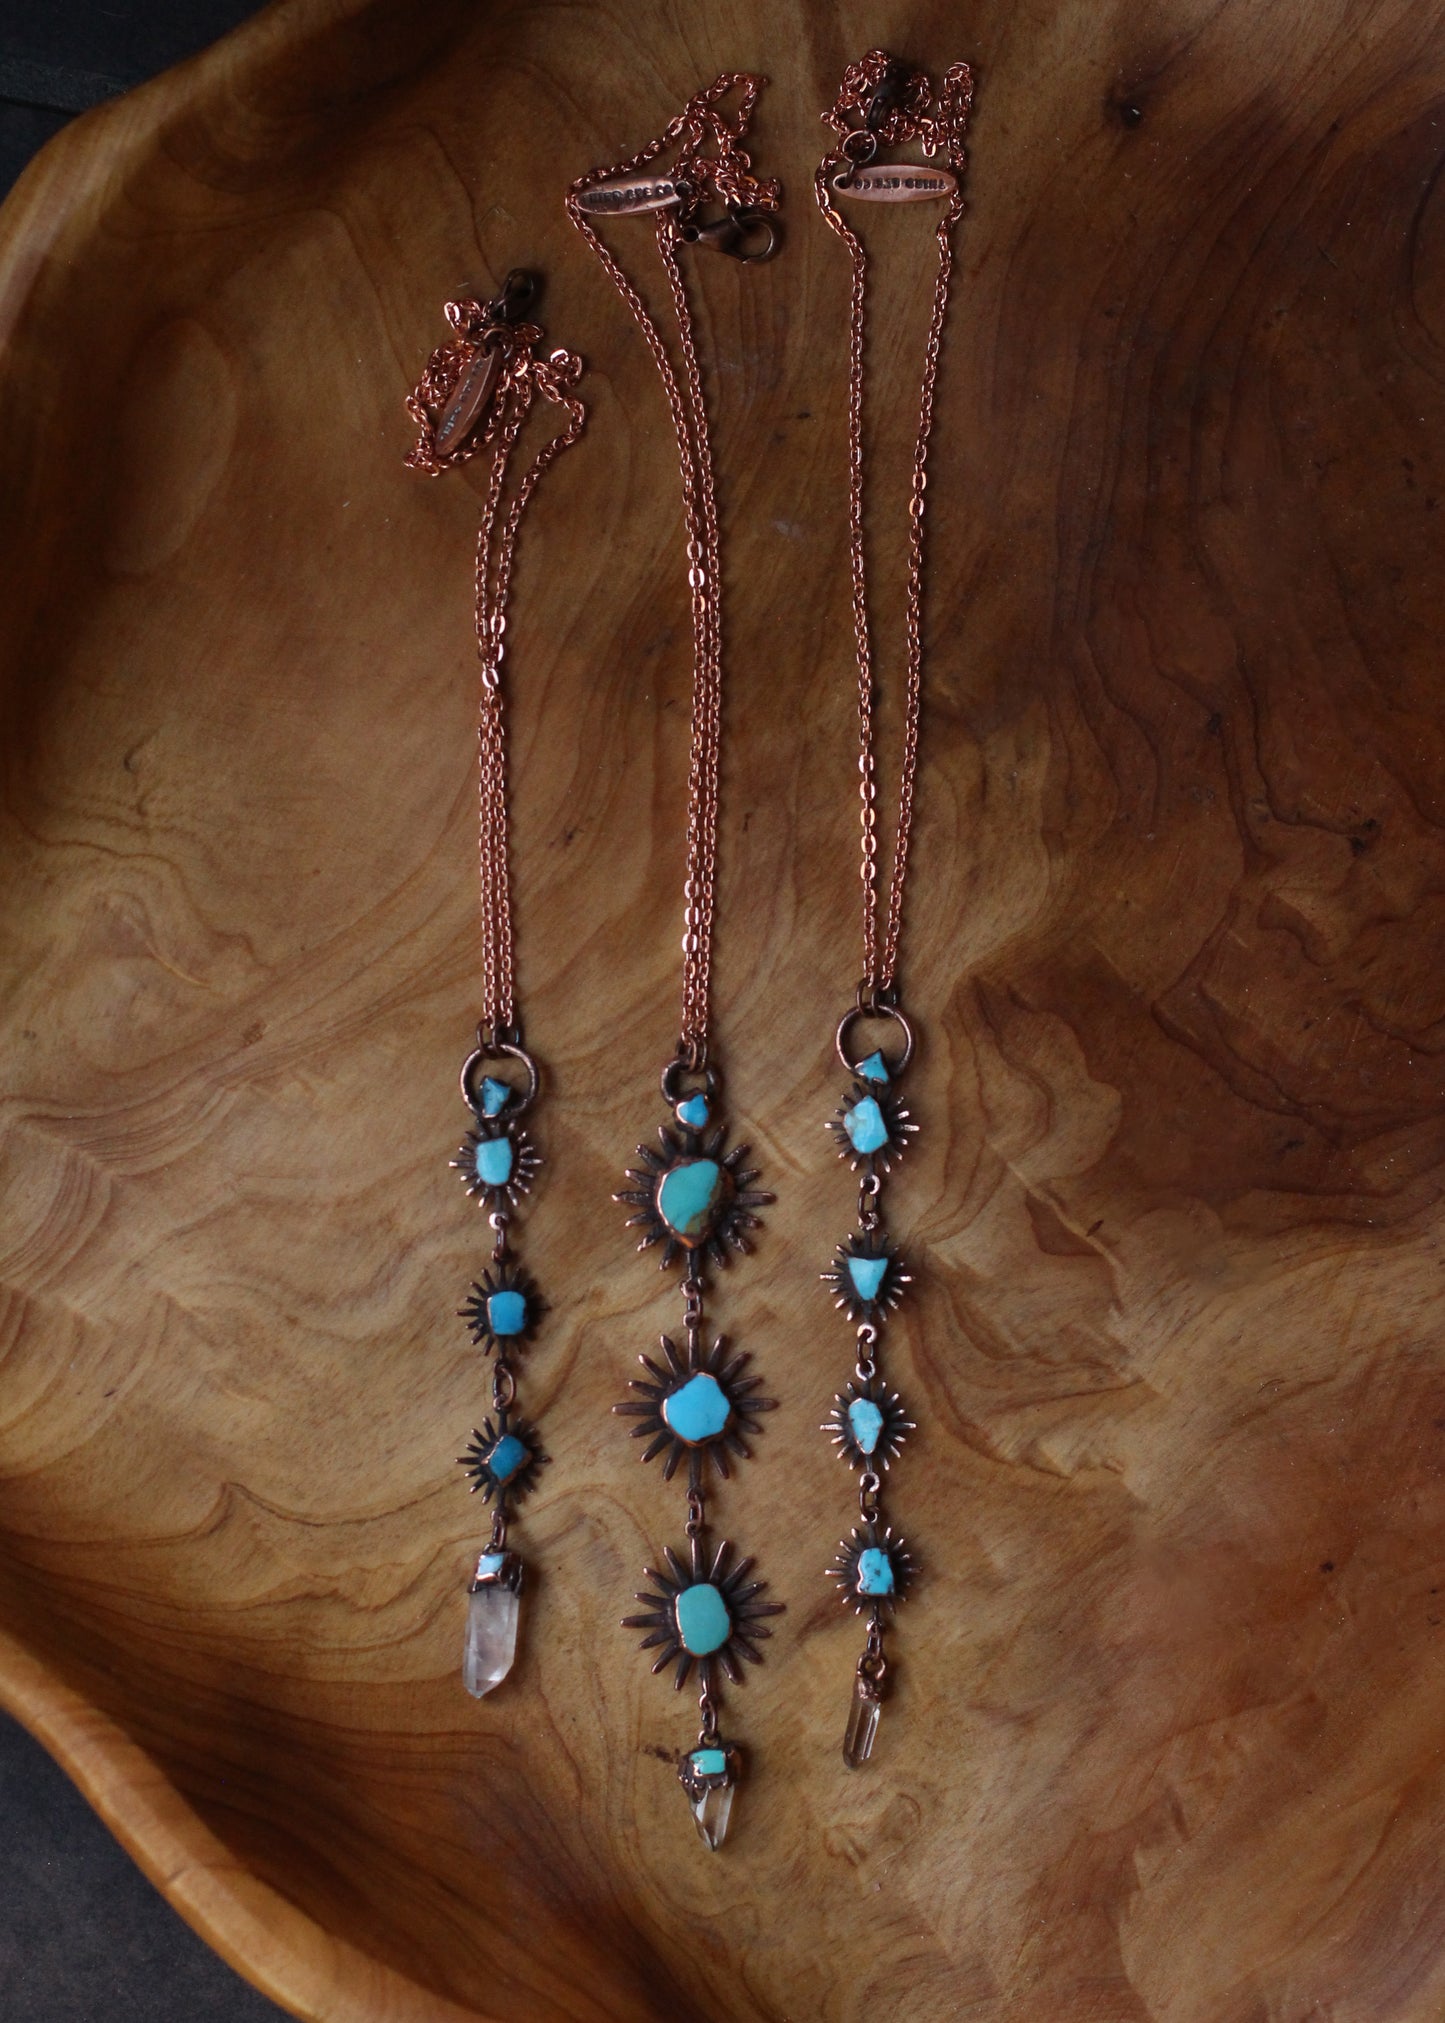 Inlaid Turquoise and Quartz tiered necklace